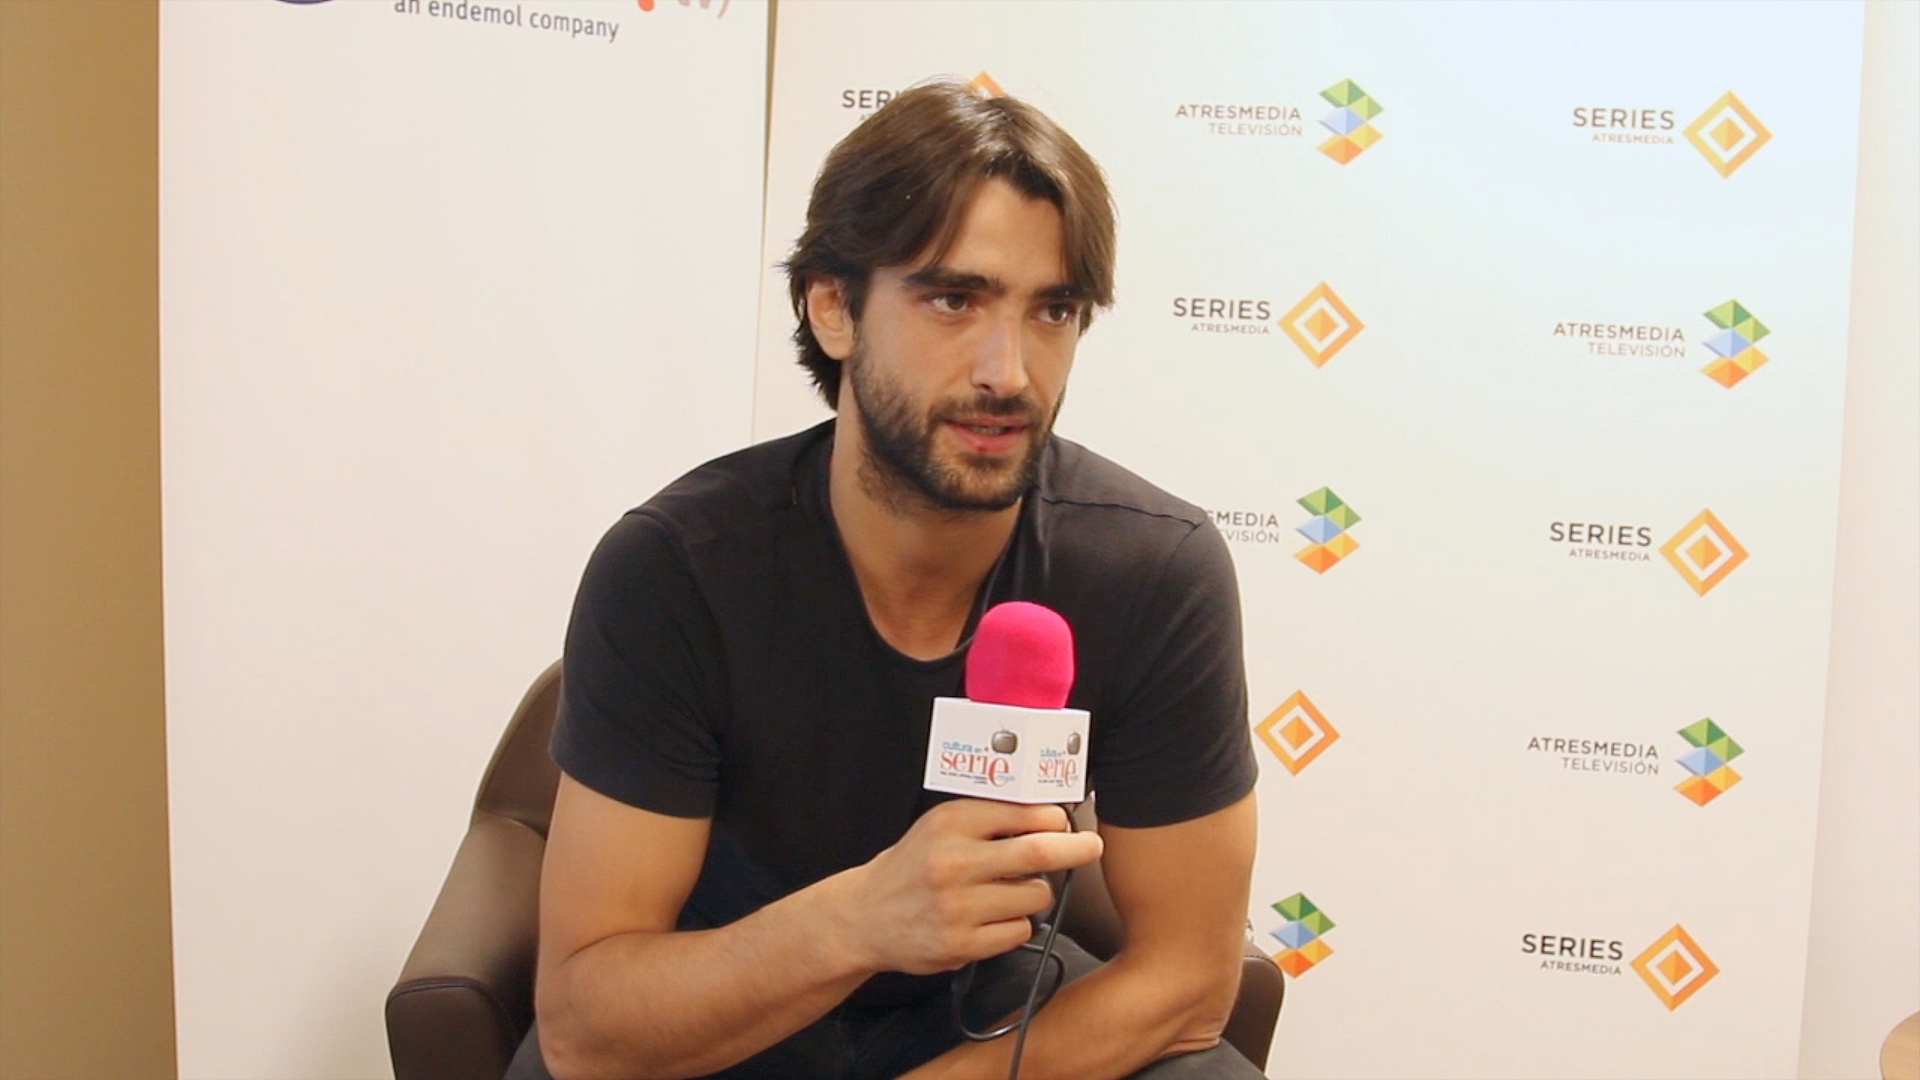 Aitor Luna: Media interview, Spokesperson, Arnau Estanyol in Cathedral of the Sea series. 1920x1080 Full HD Wallpaper.